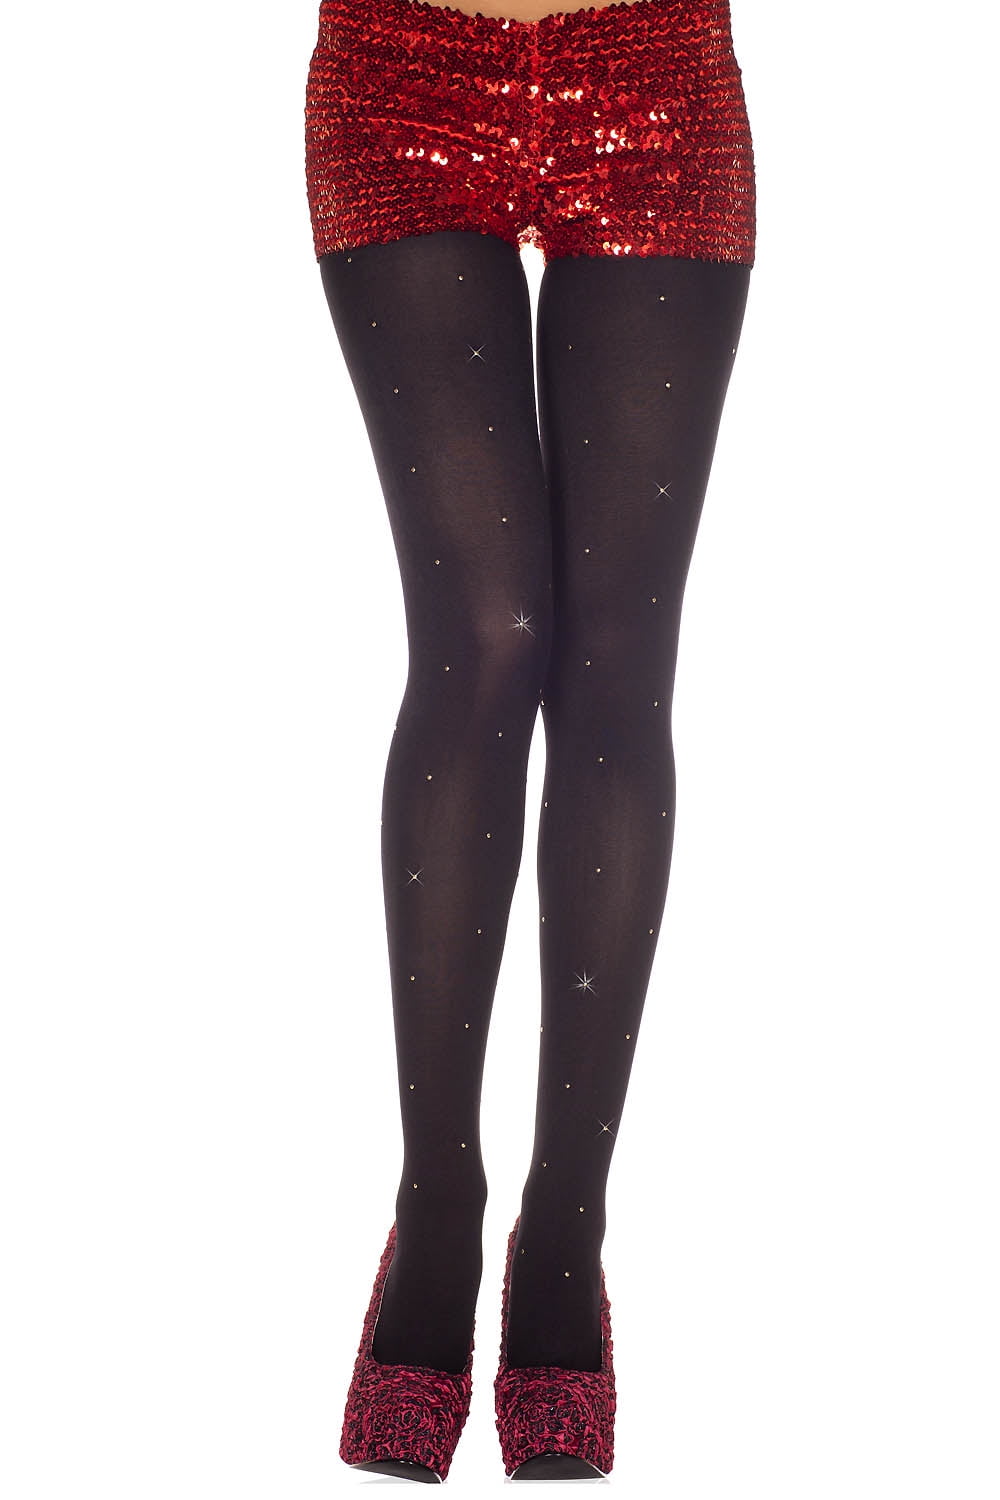 Studs spandex opaque tights - Style: 37002-BLACK 